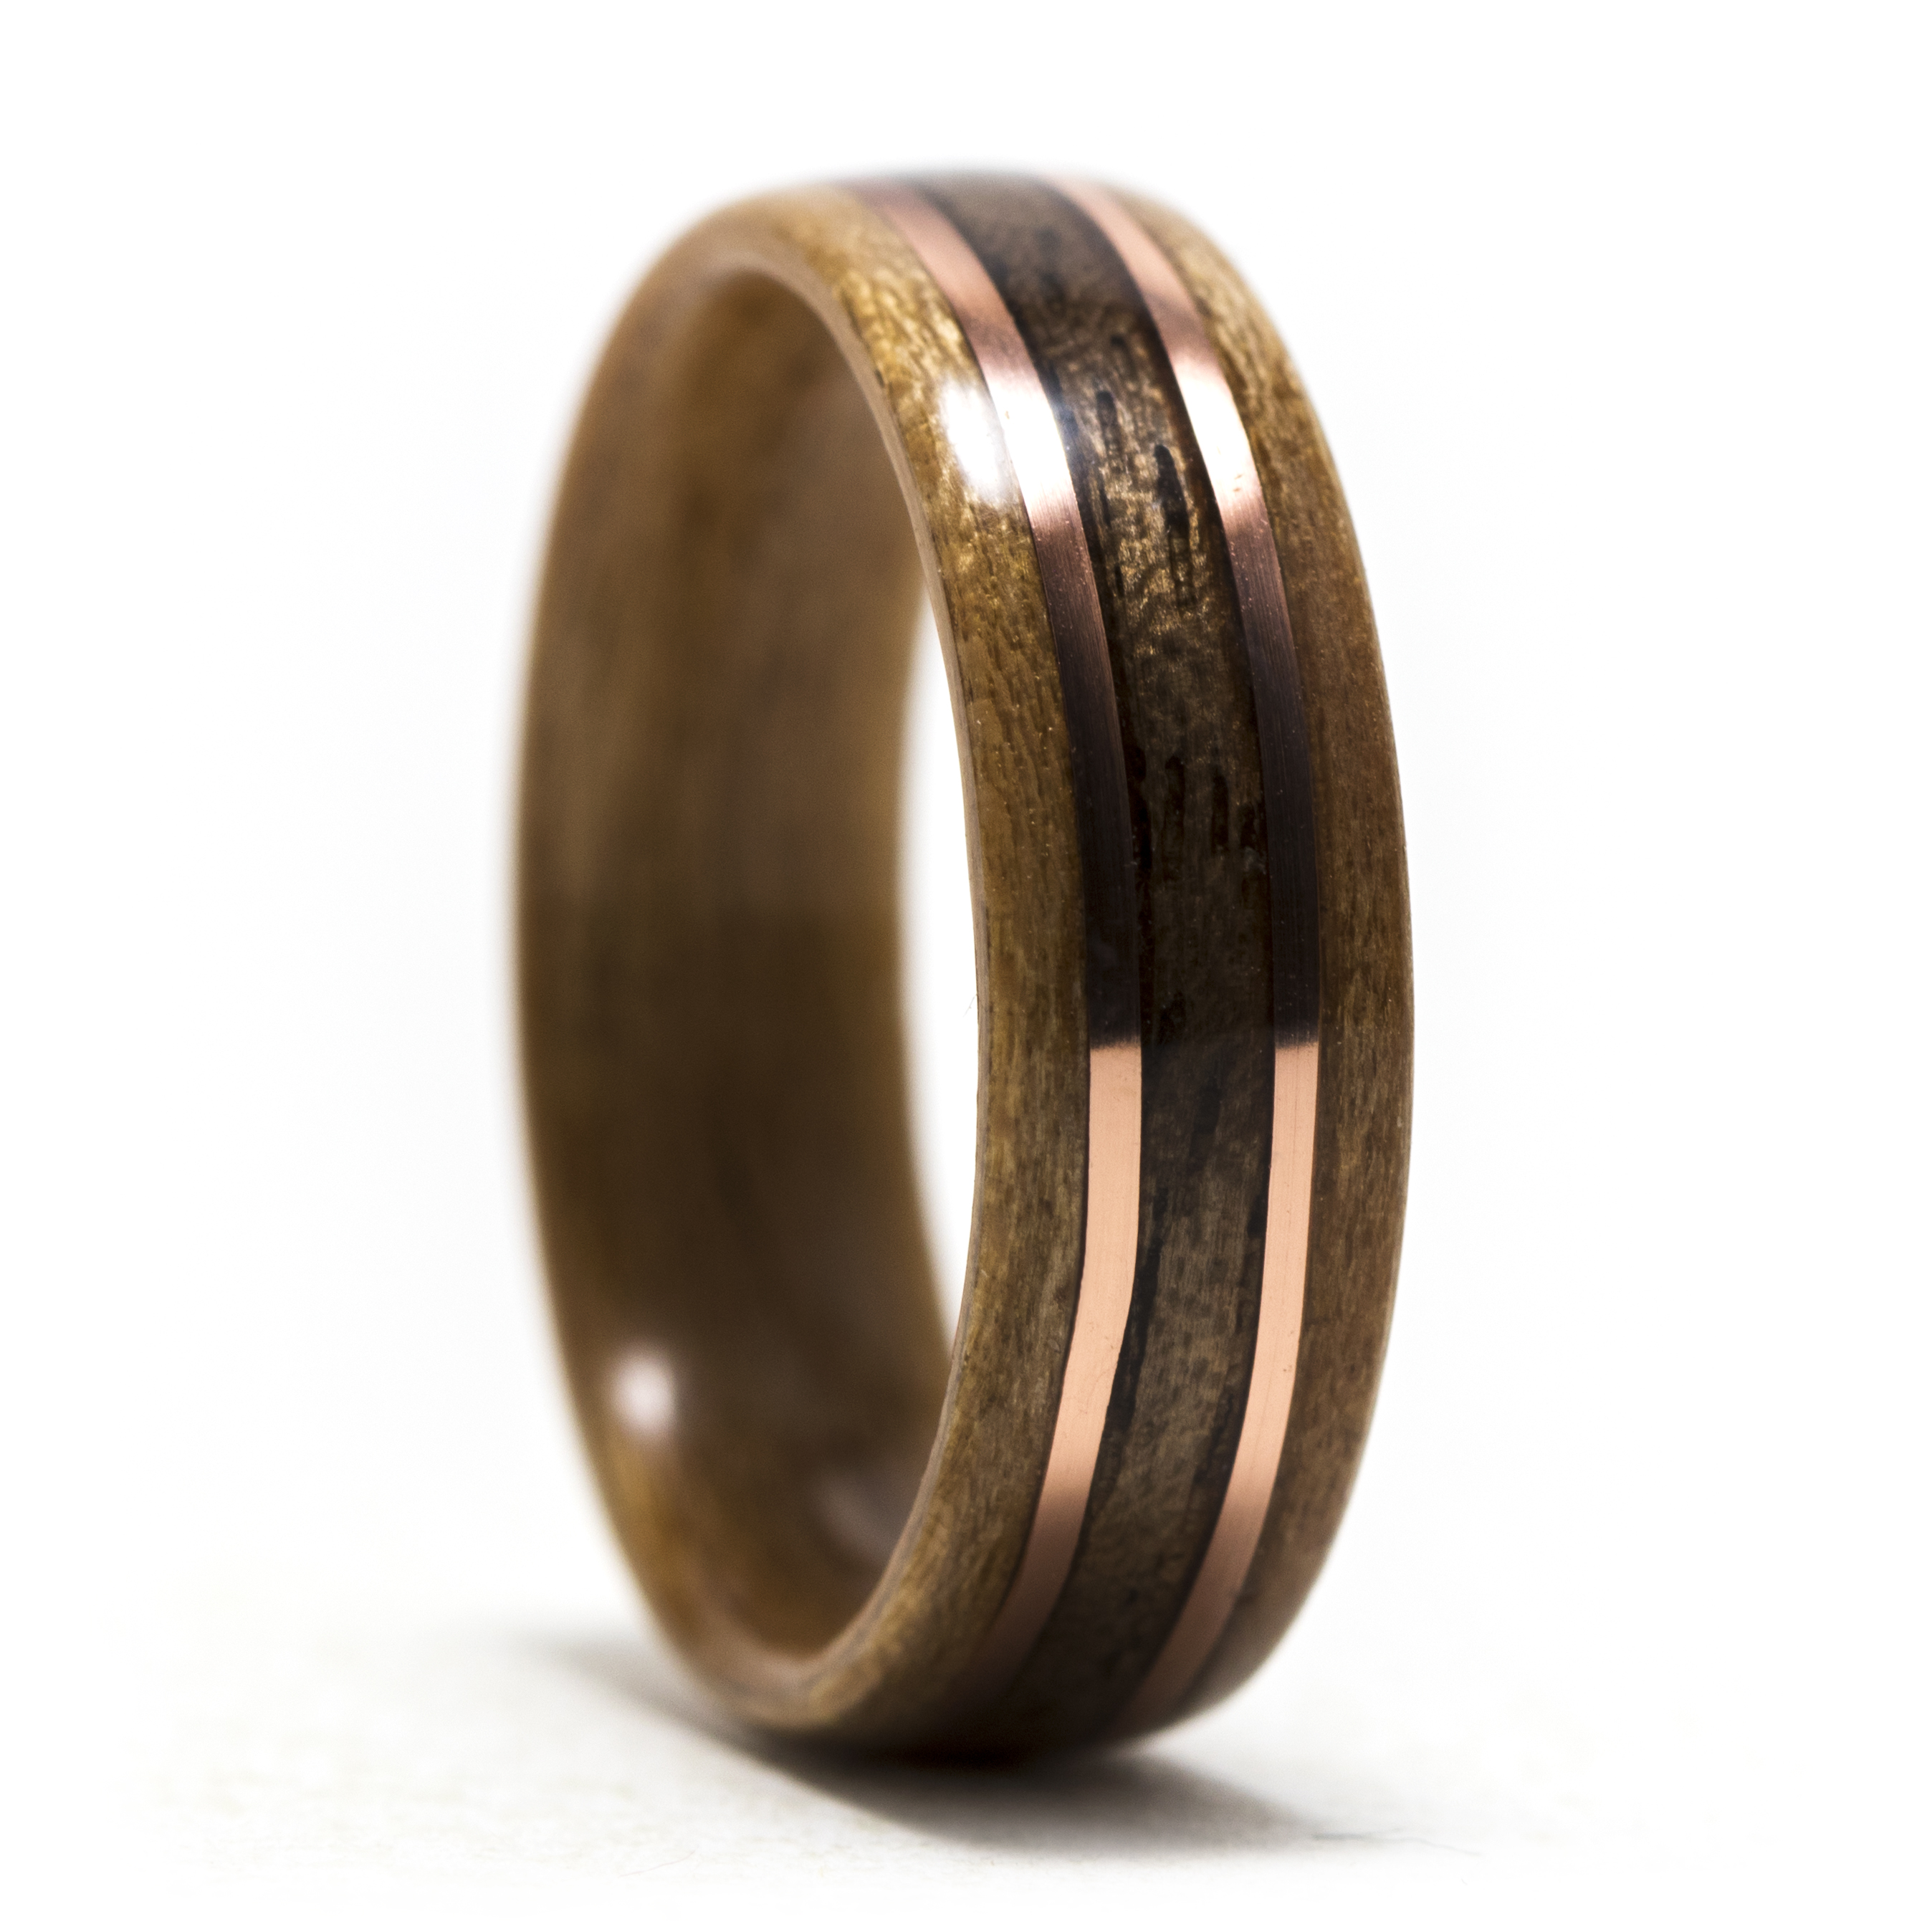 Cherry Wood Ring With Walnut And Copper Inlay - Warren Rings